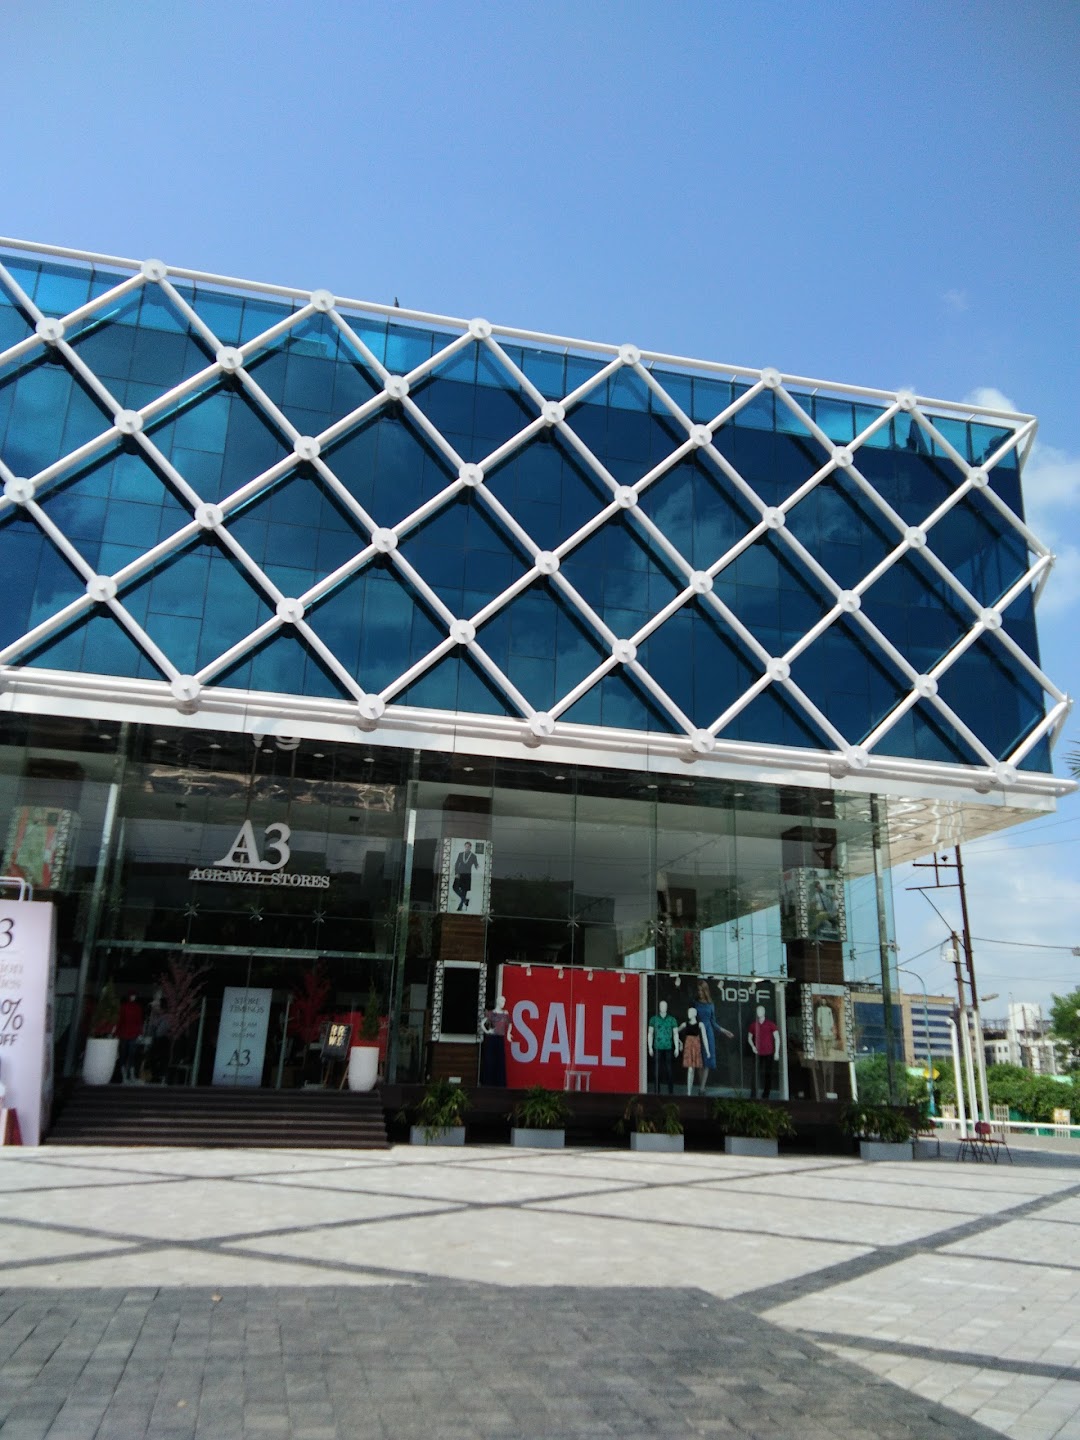 A3 Agrawal Stores